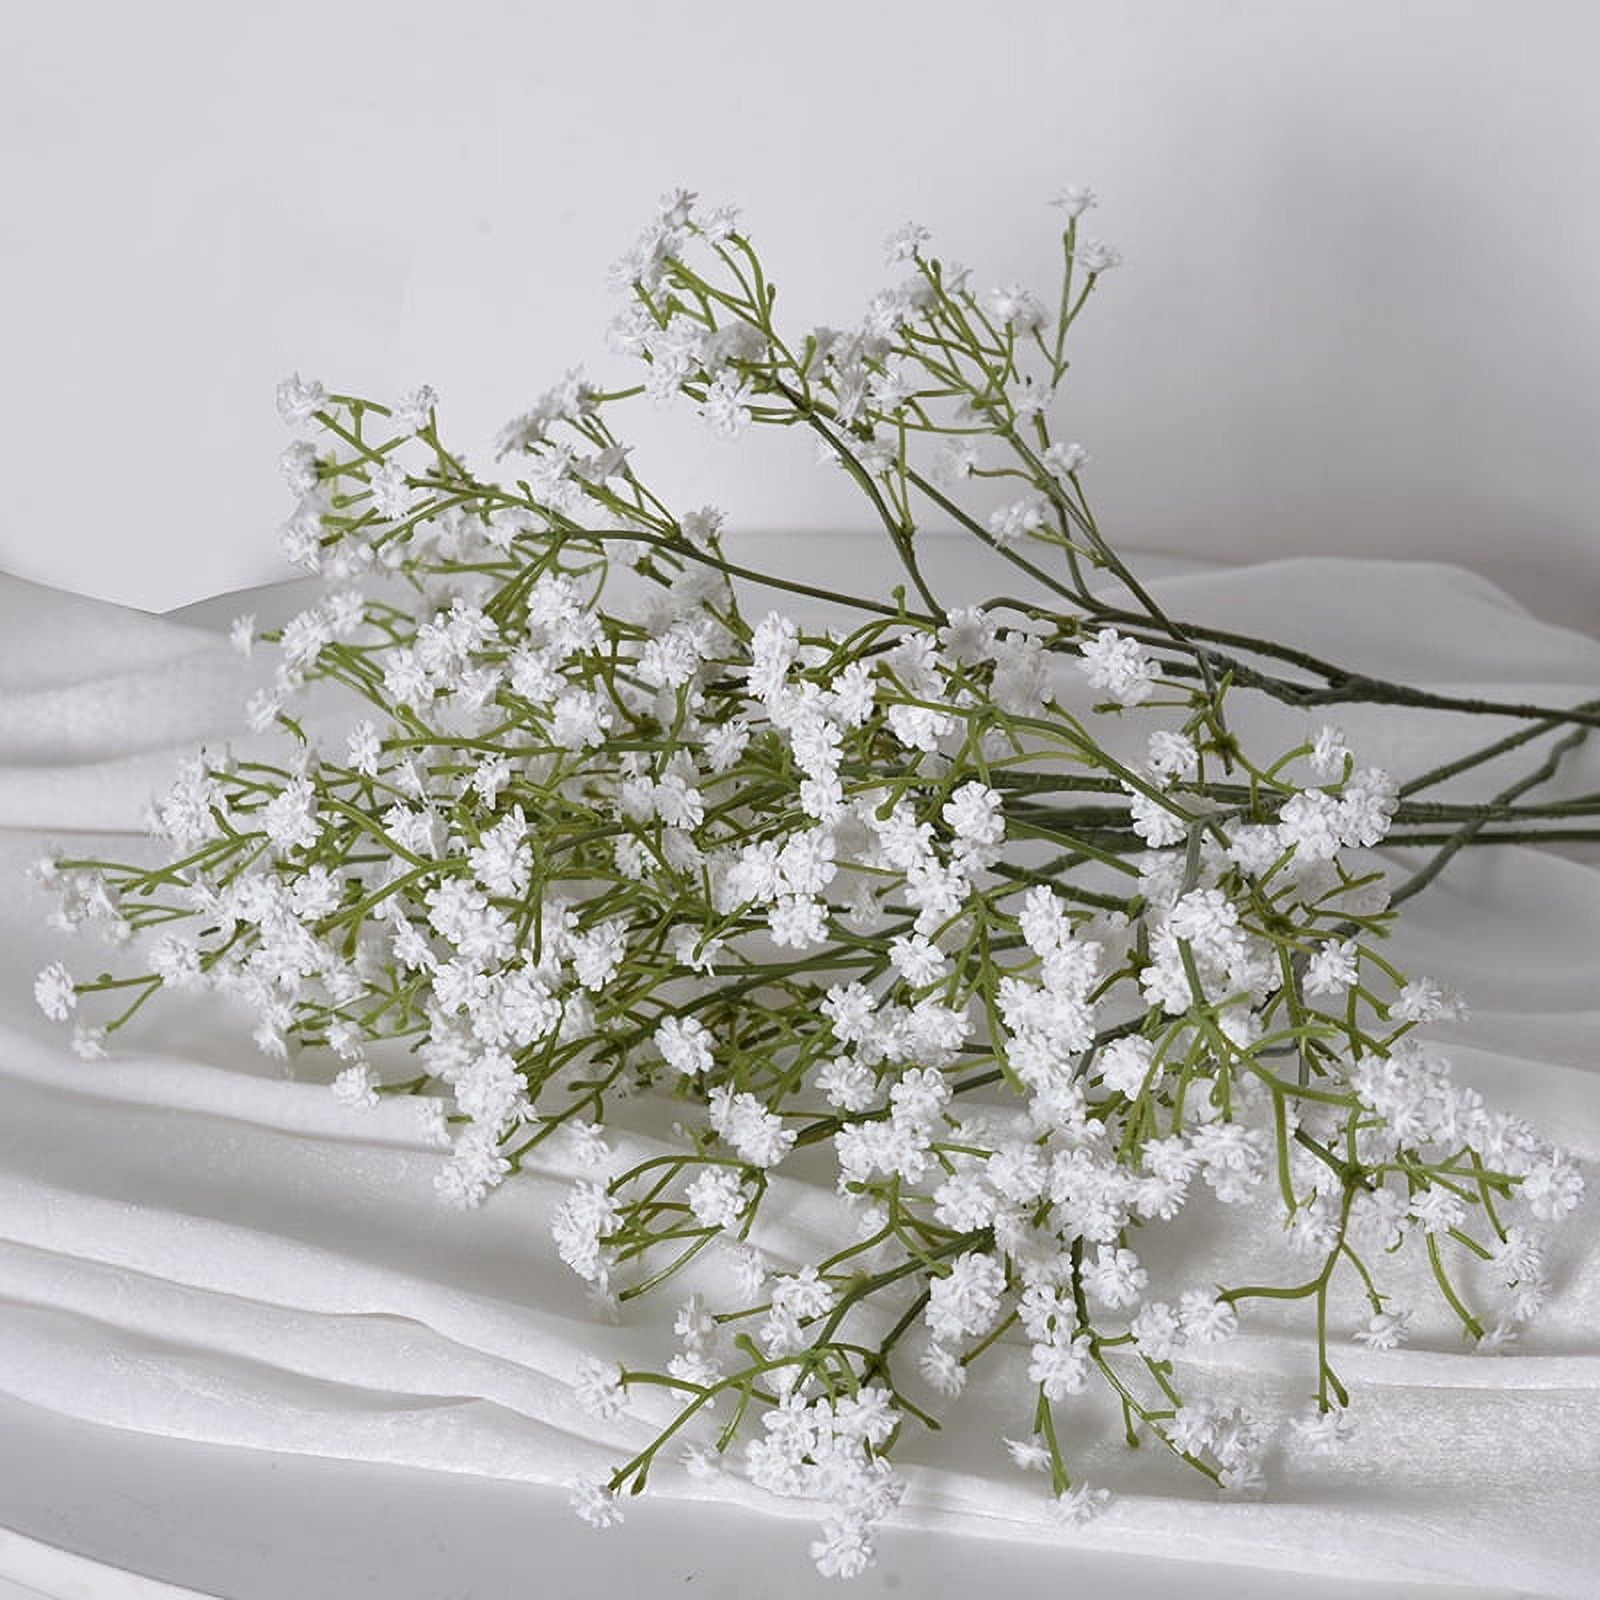 Zukuco 10Pcs Babys Breath Artificial Flowers Fake Flowers Real Touch  Gypsophila Floral in Bulk for Home Wedding Garden Decor (White Long Stem) 